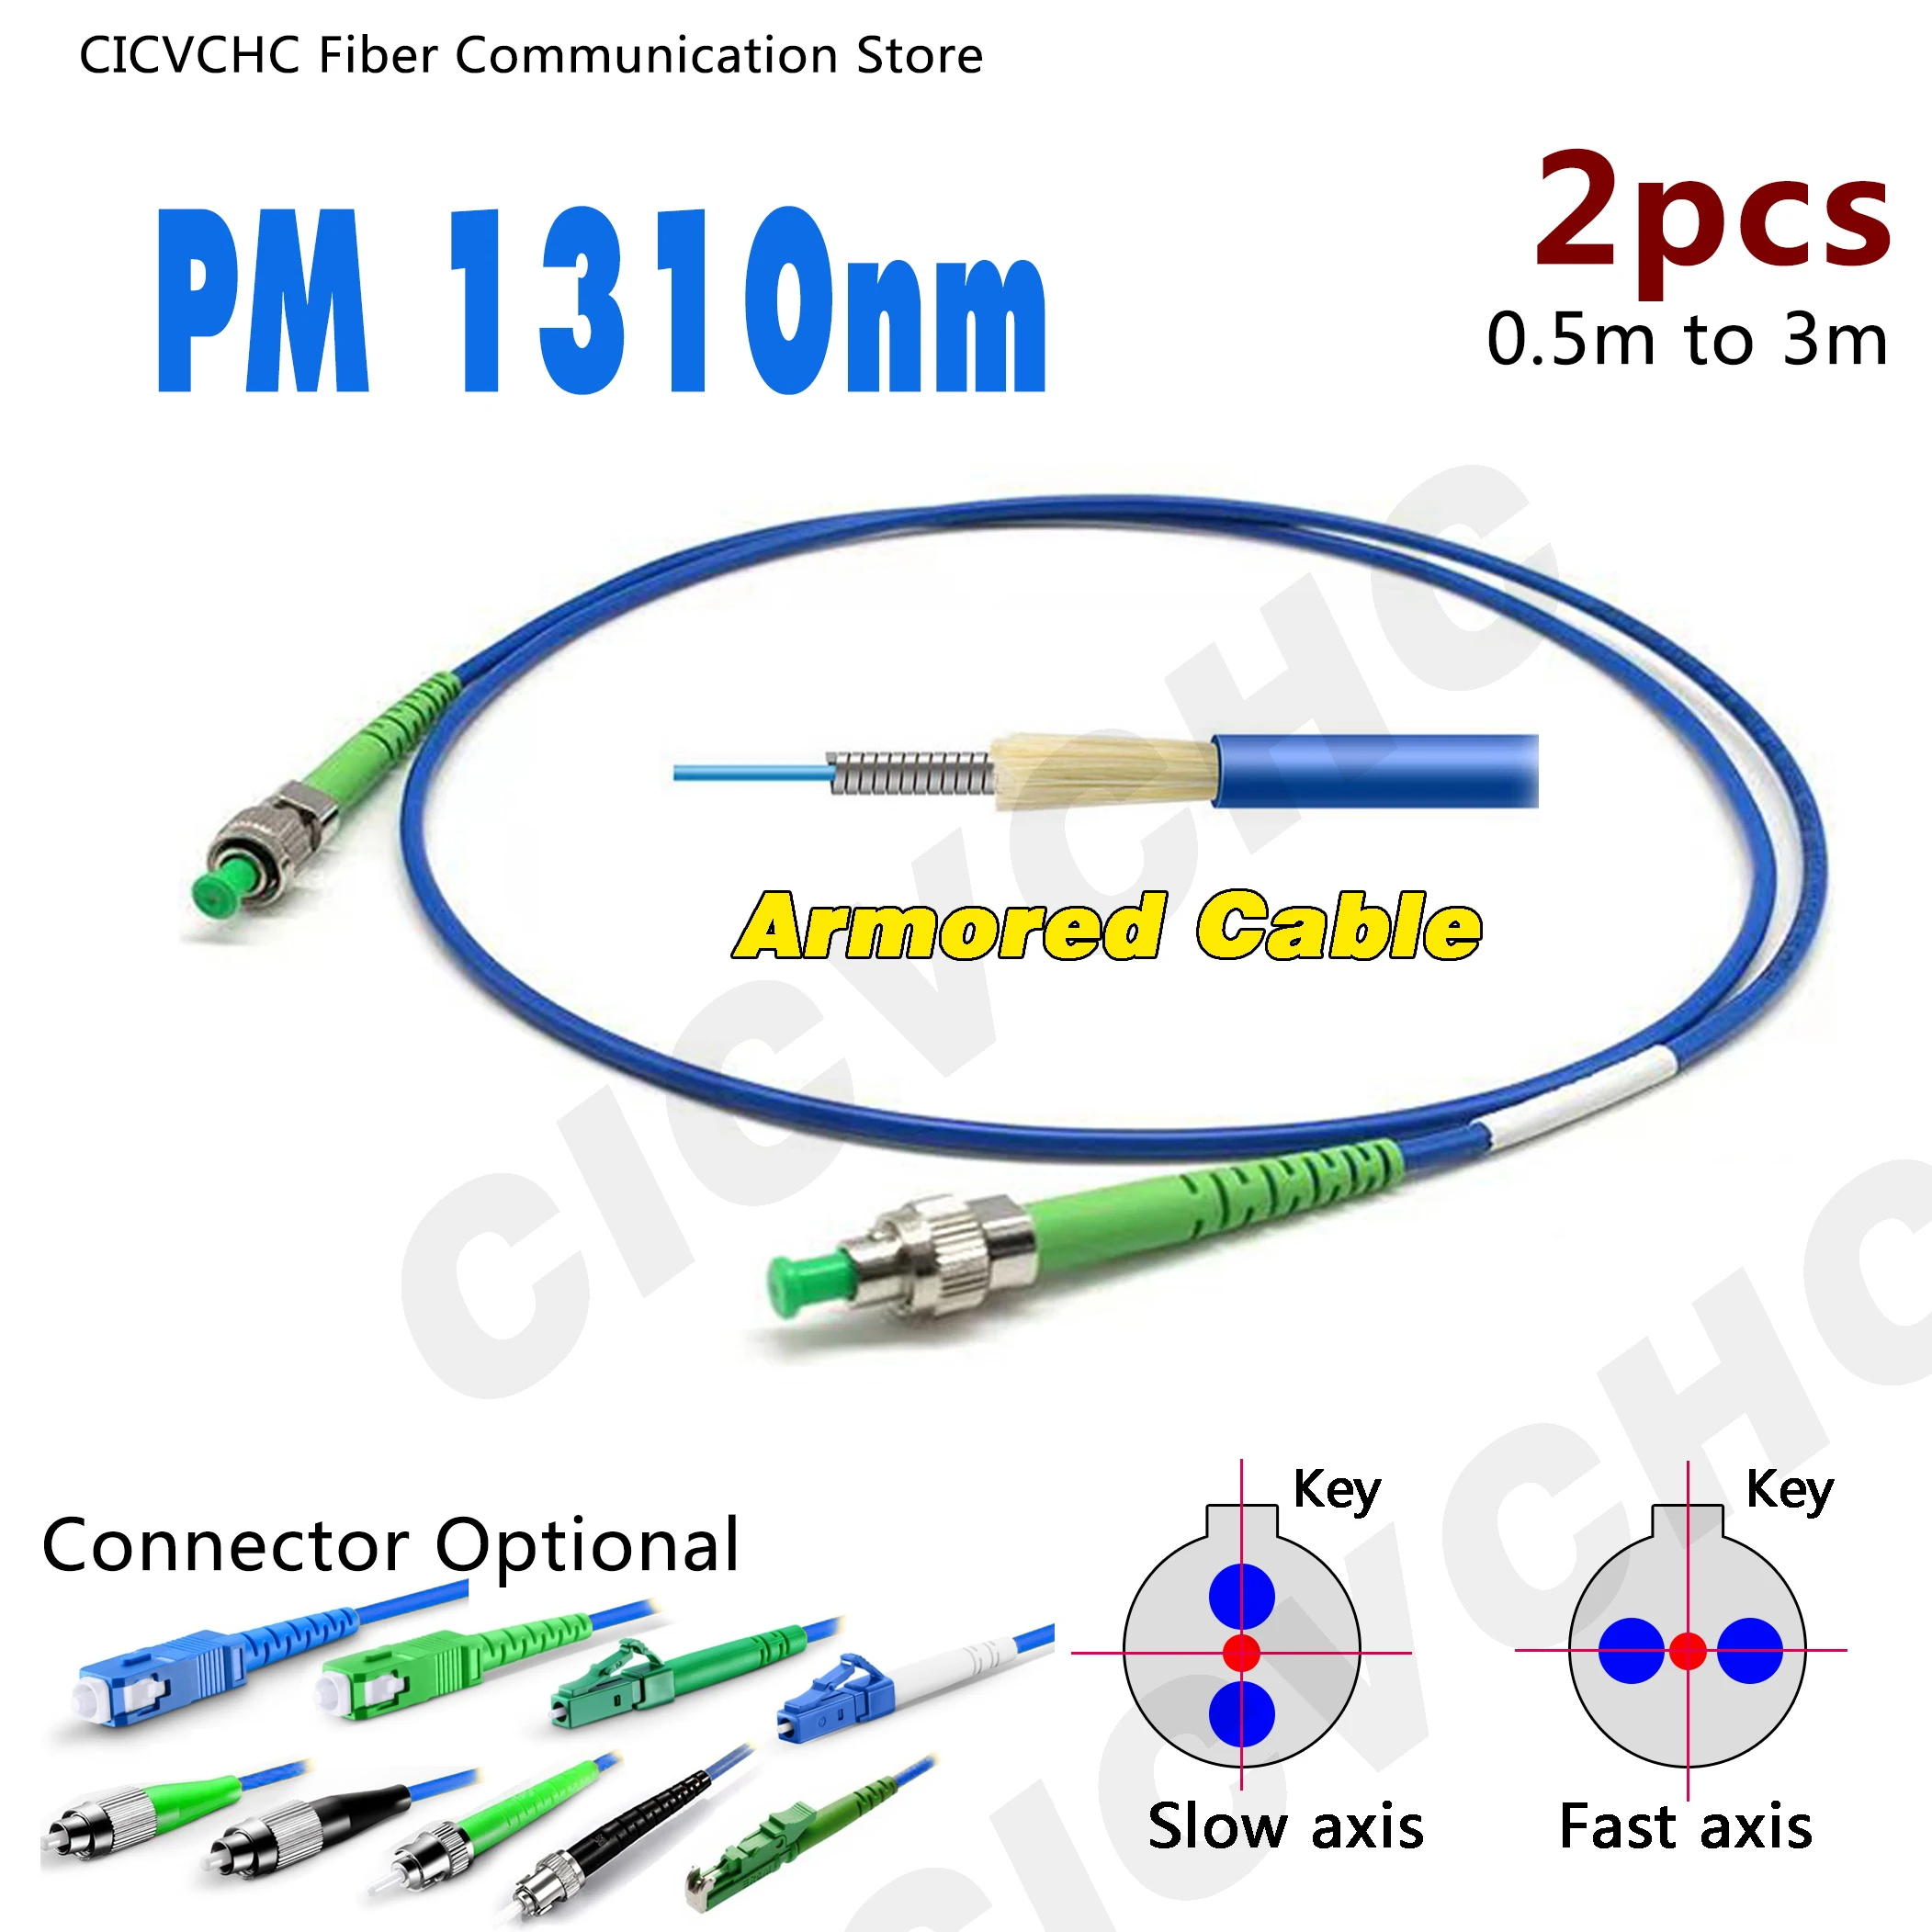 2pcs PM 1310nm Fiber Patchcord-SC, FC, LC, ST-Fast or Slow-3.0mm Armored Cable-Polarization Maintaining-Panda Fber-0.5m to 3m